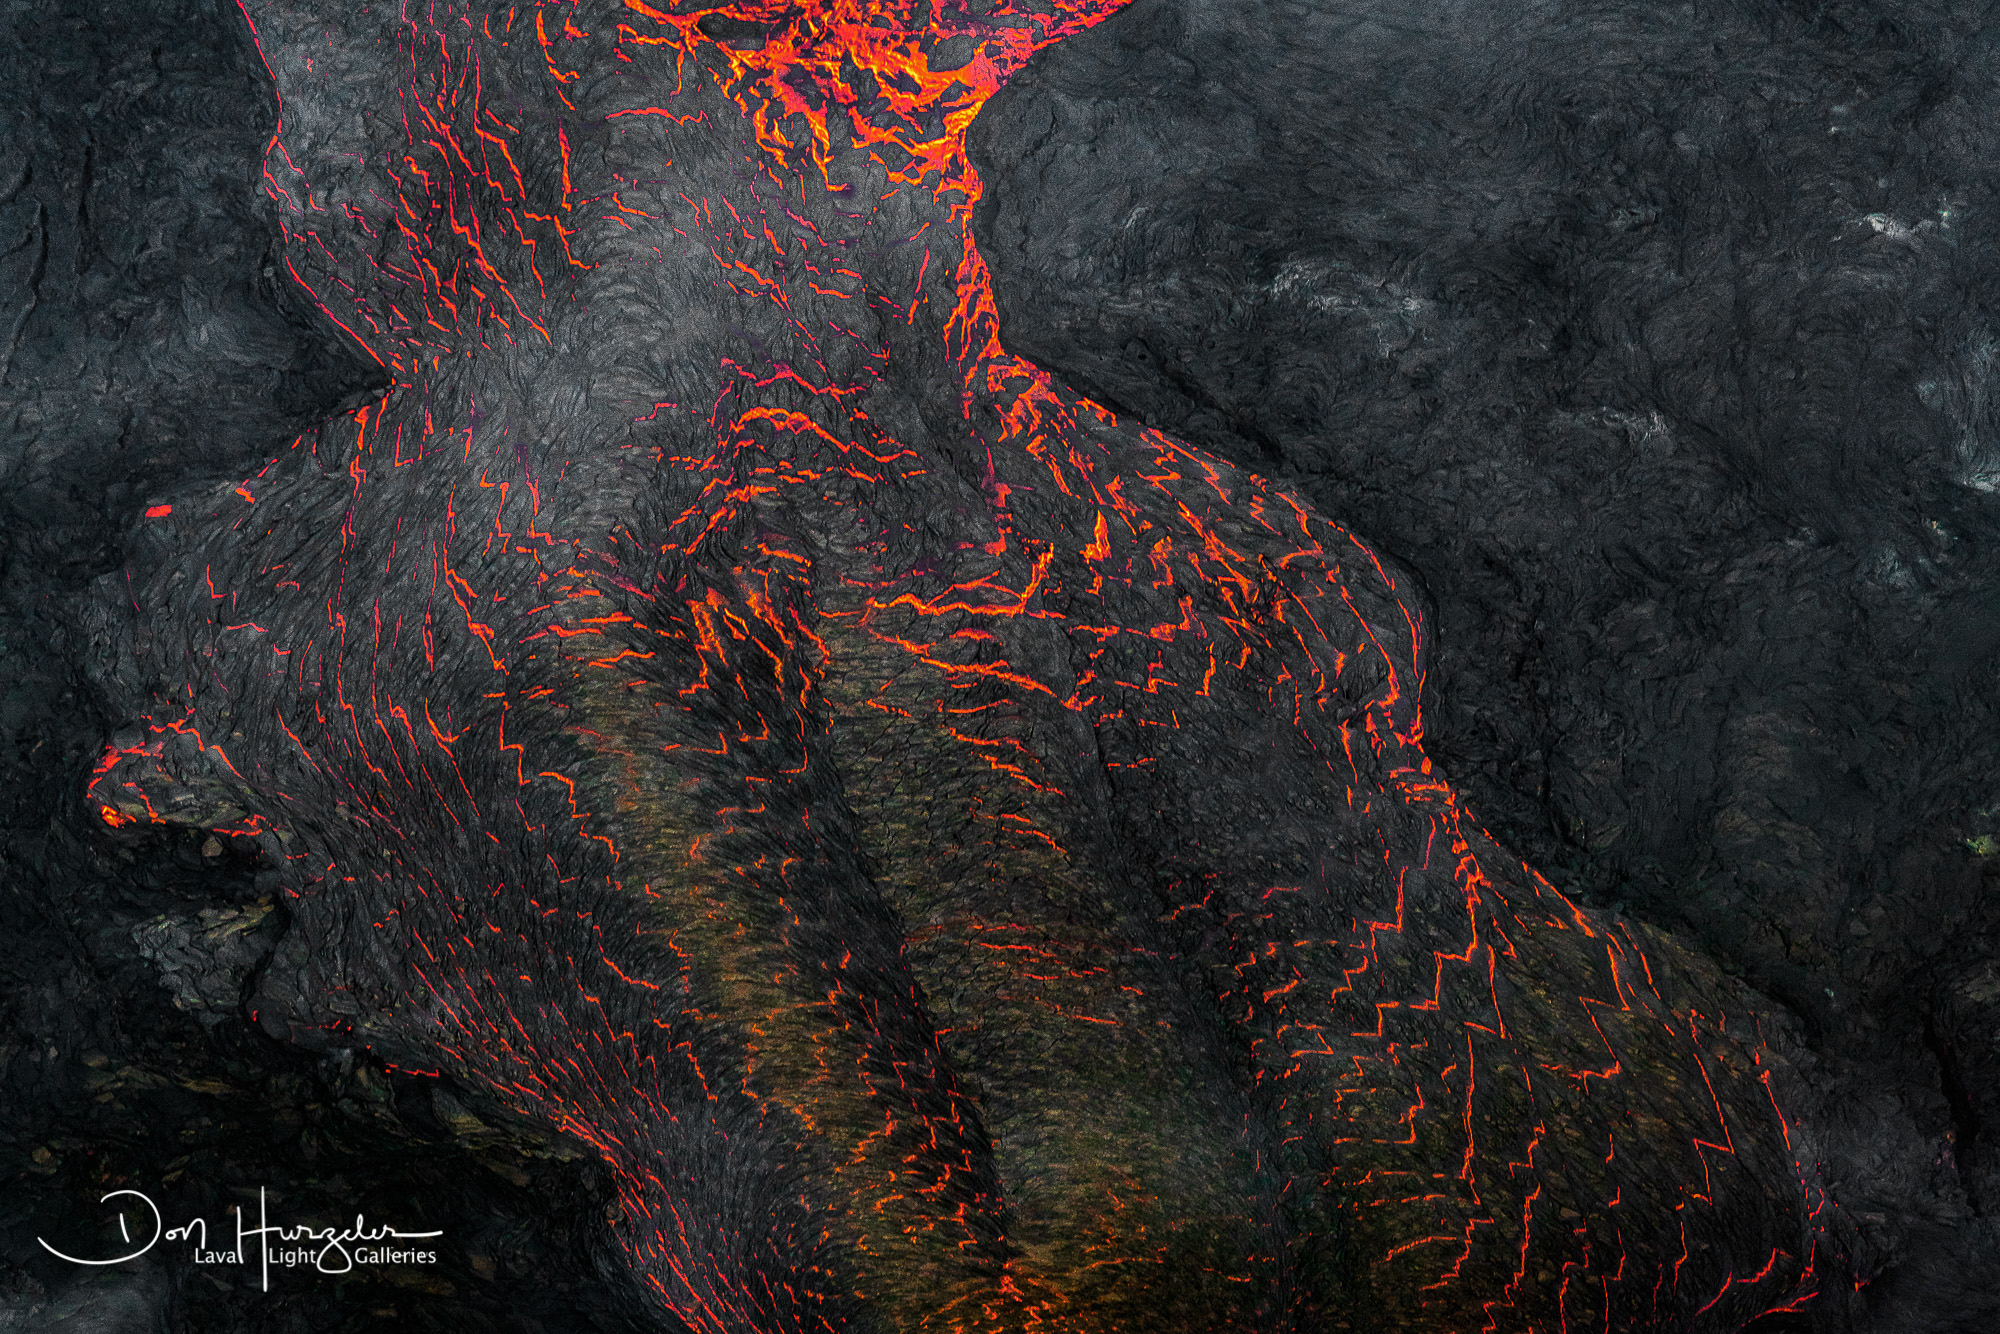 Lots of lava flowing.